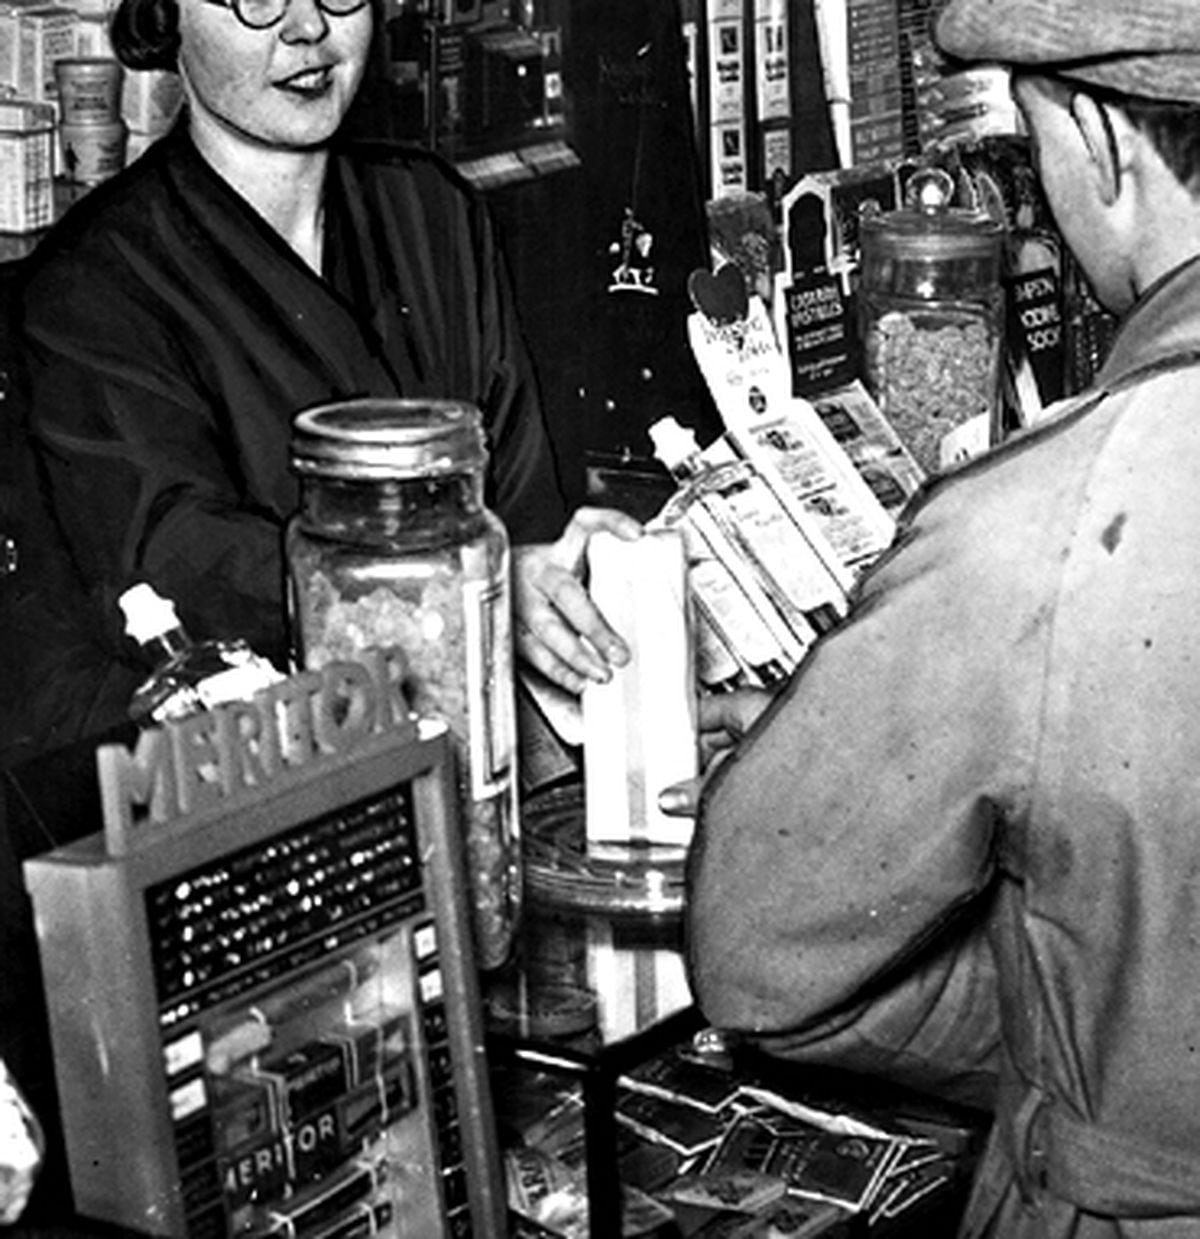 The young novelist Edith Pargeter working in Bemrose's chemists shop in Dawley in 1936 – her first book had just been published.